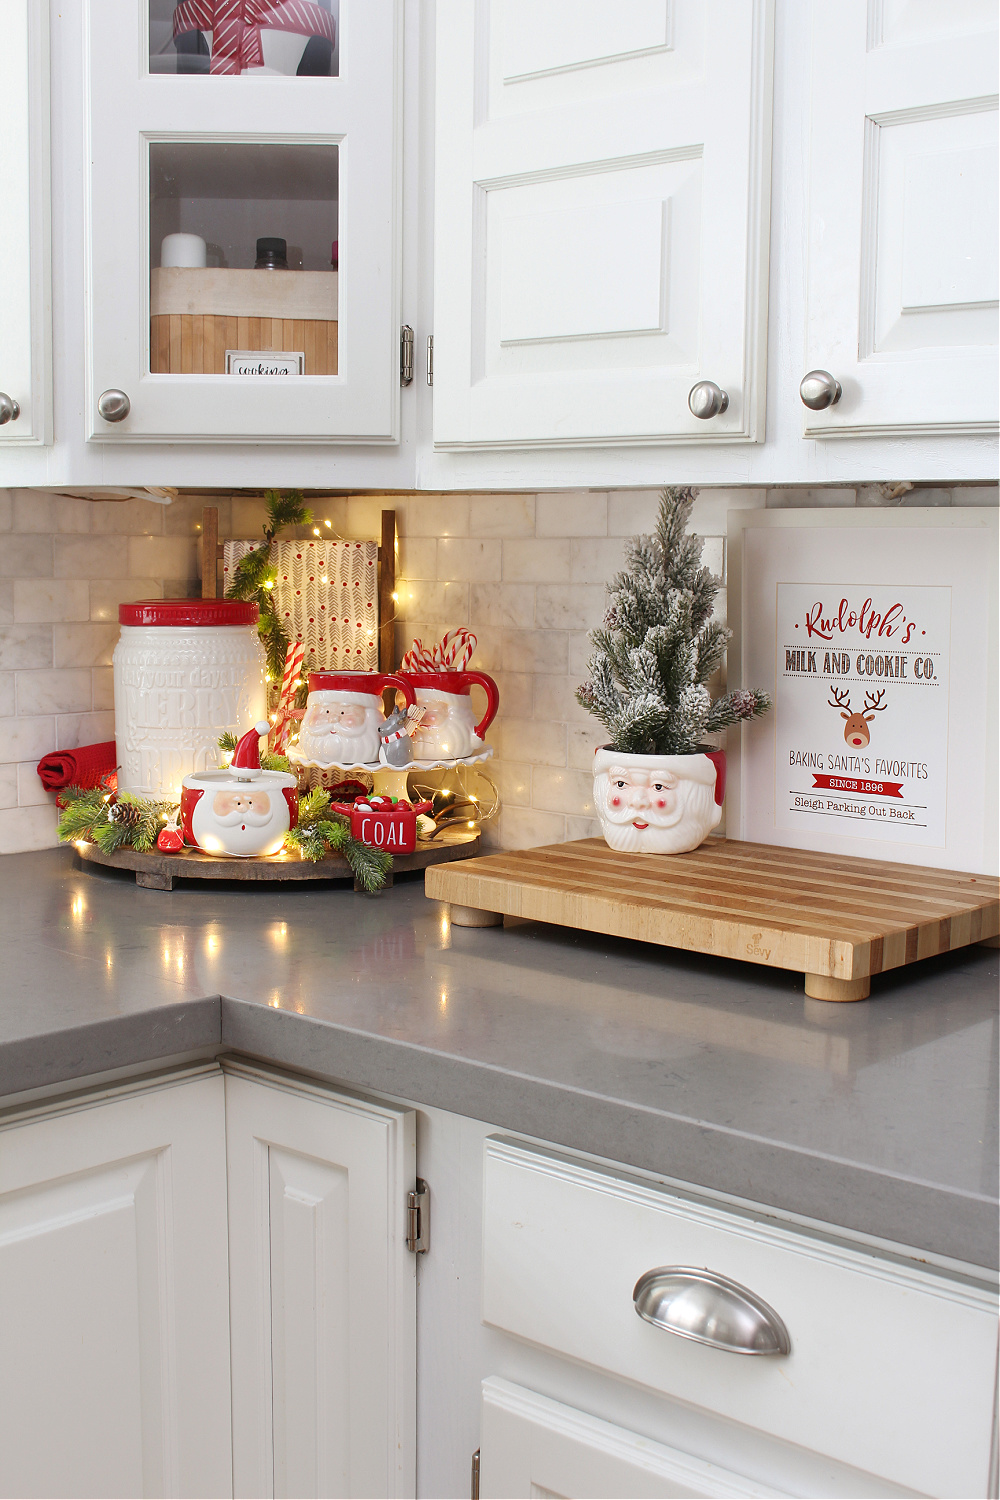 Festive Red and White Christmas Kitchen Decor Ideas - Clean and ...